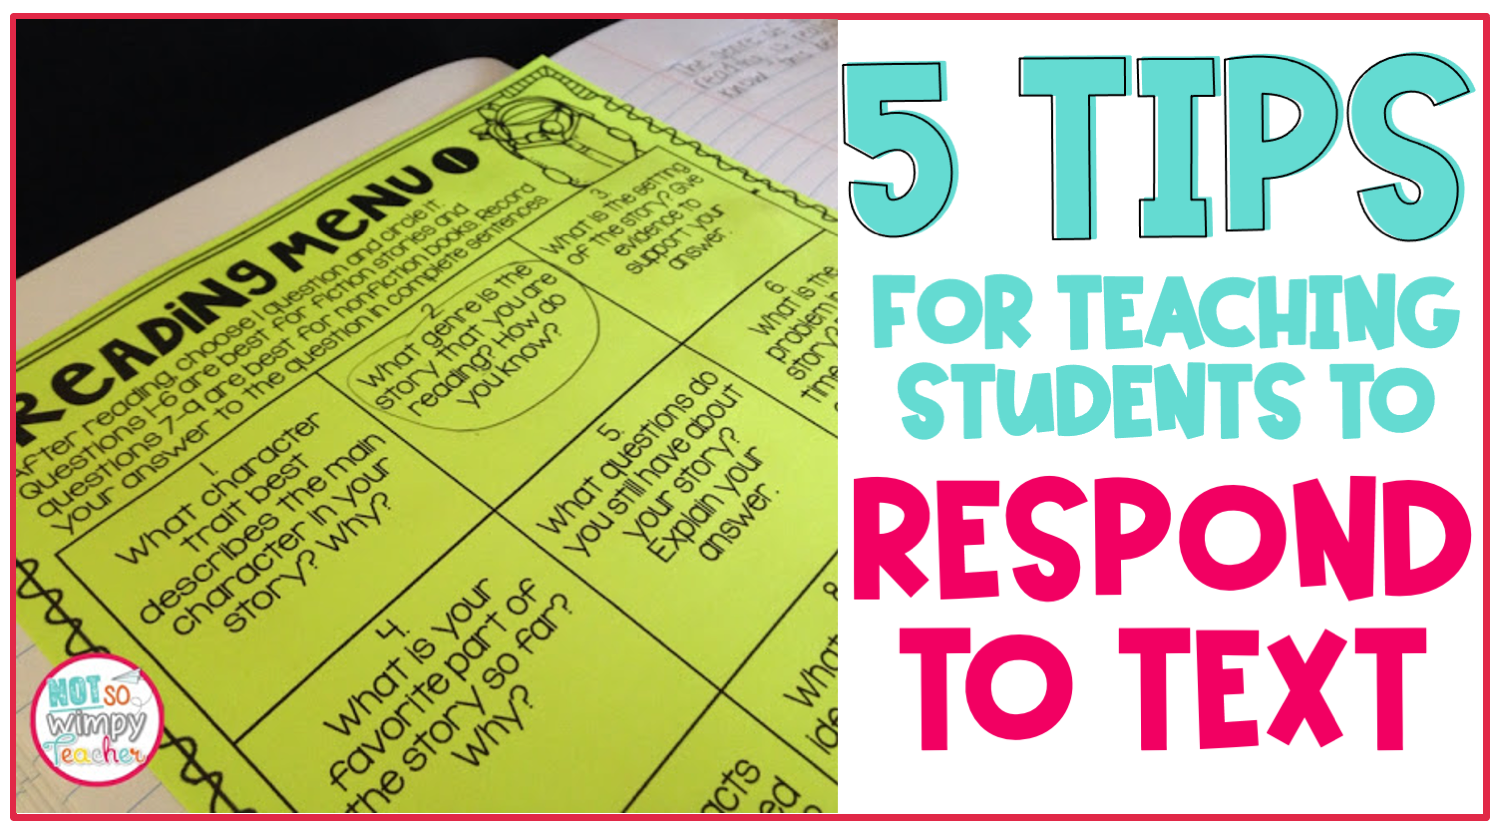 Image of a reading menu and says "5 tips for teaching students to respond to text".